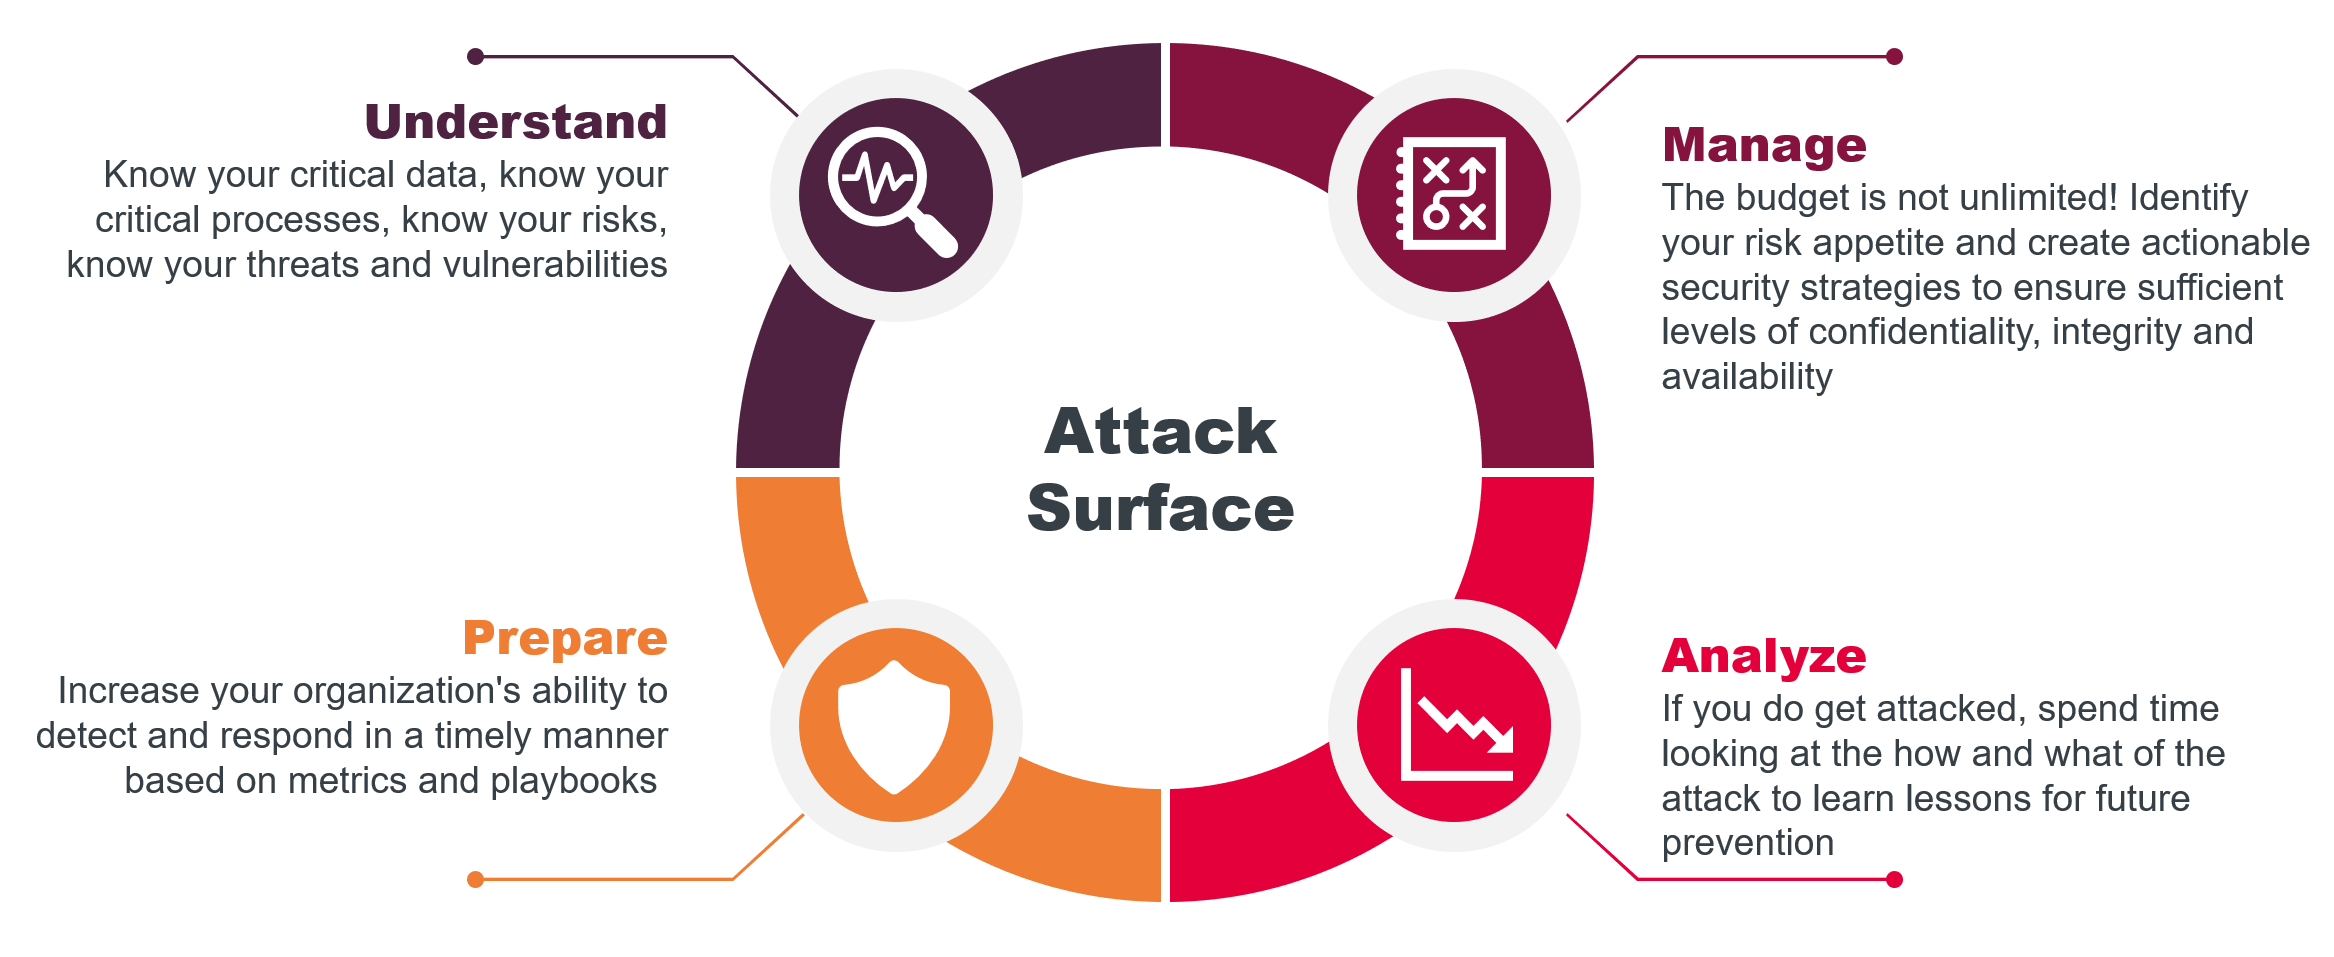 Figure 2: Minimizing the frequency and impact of attacks